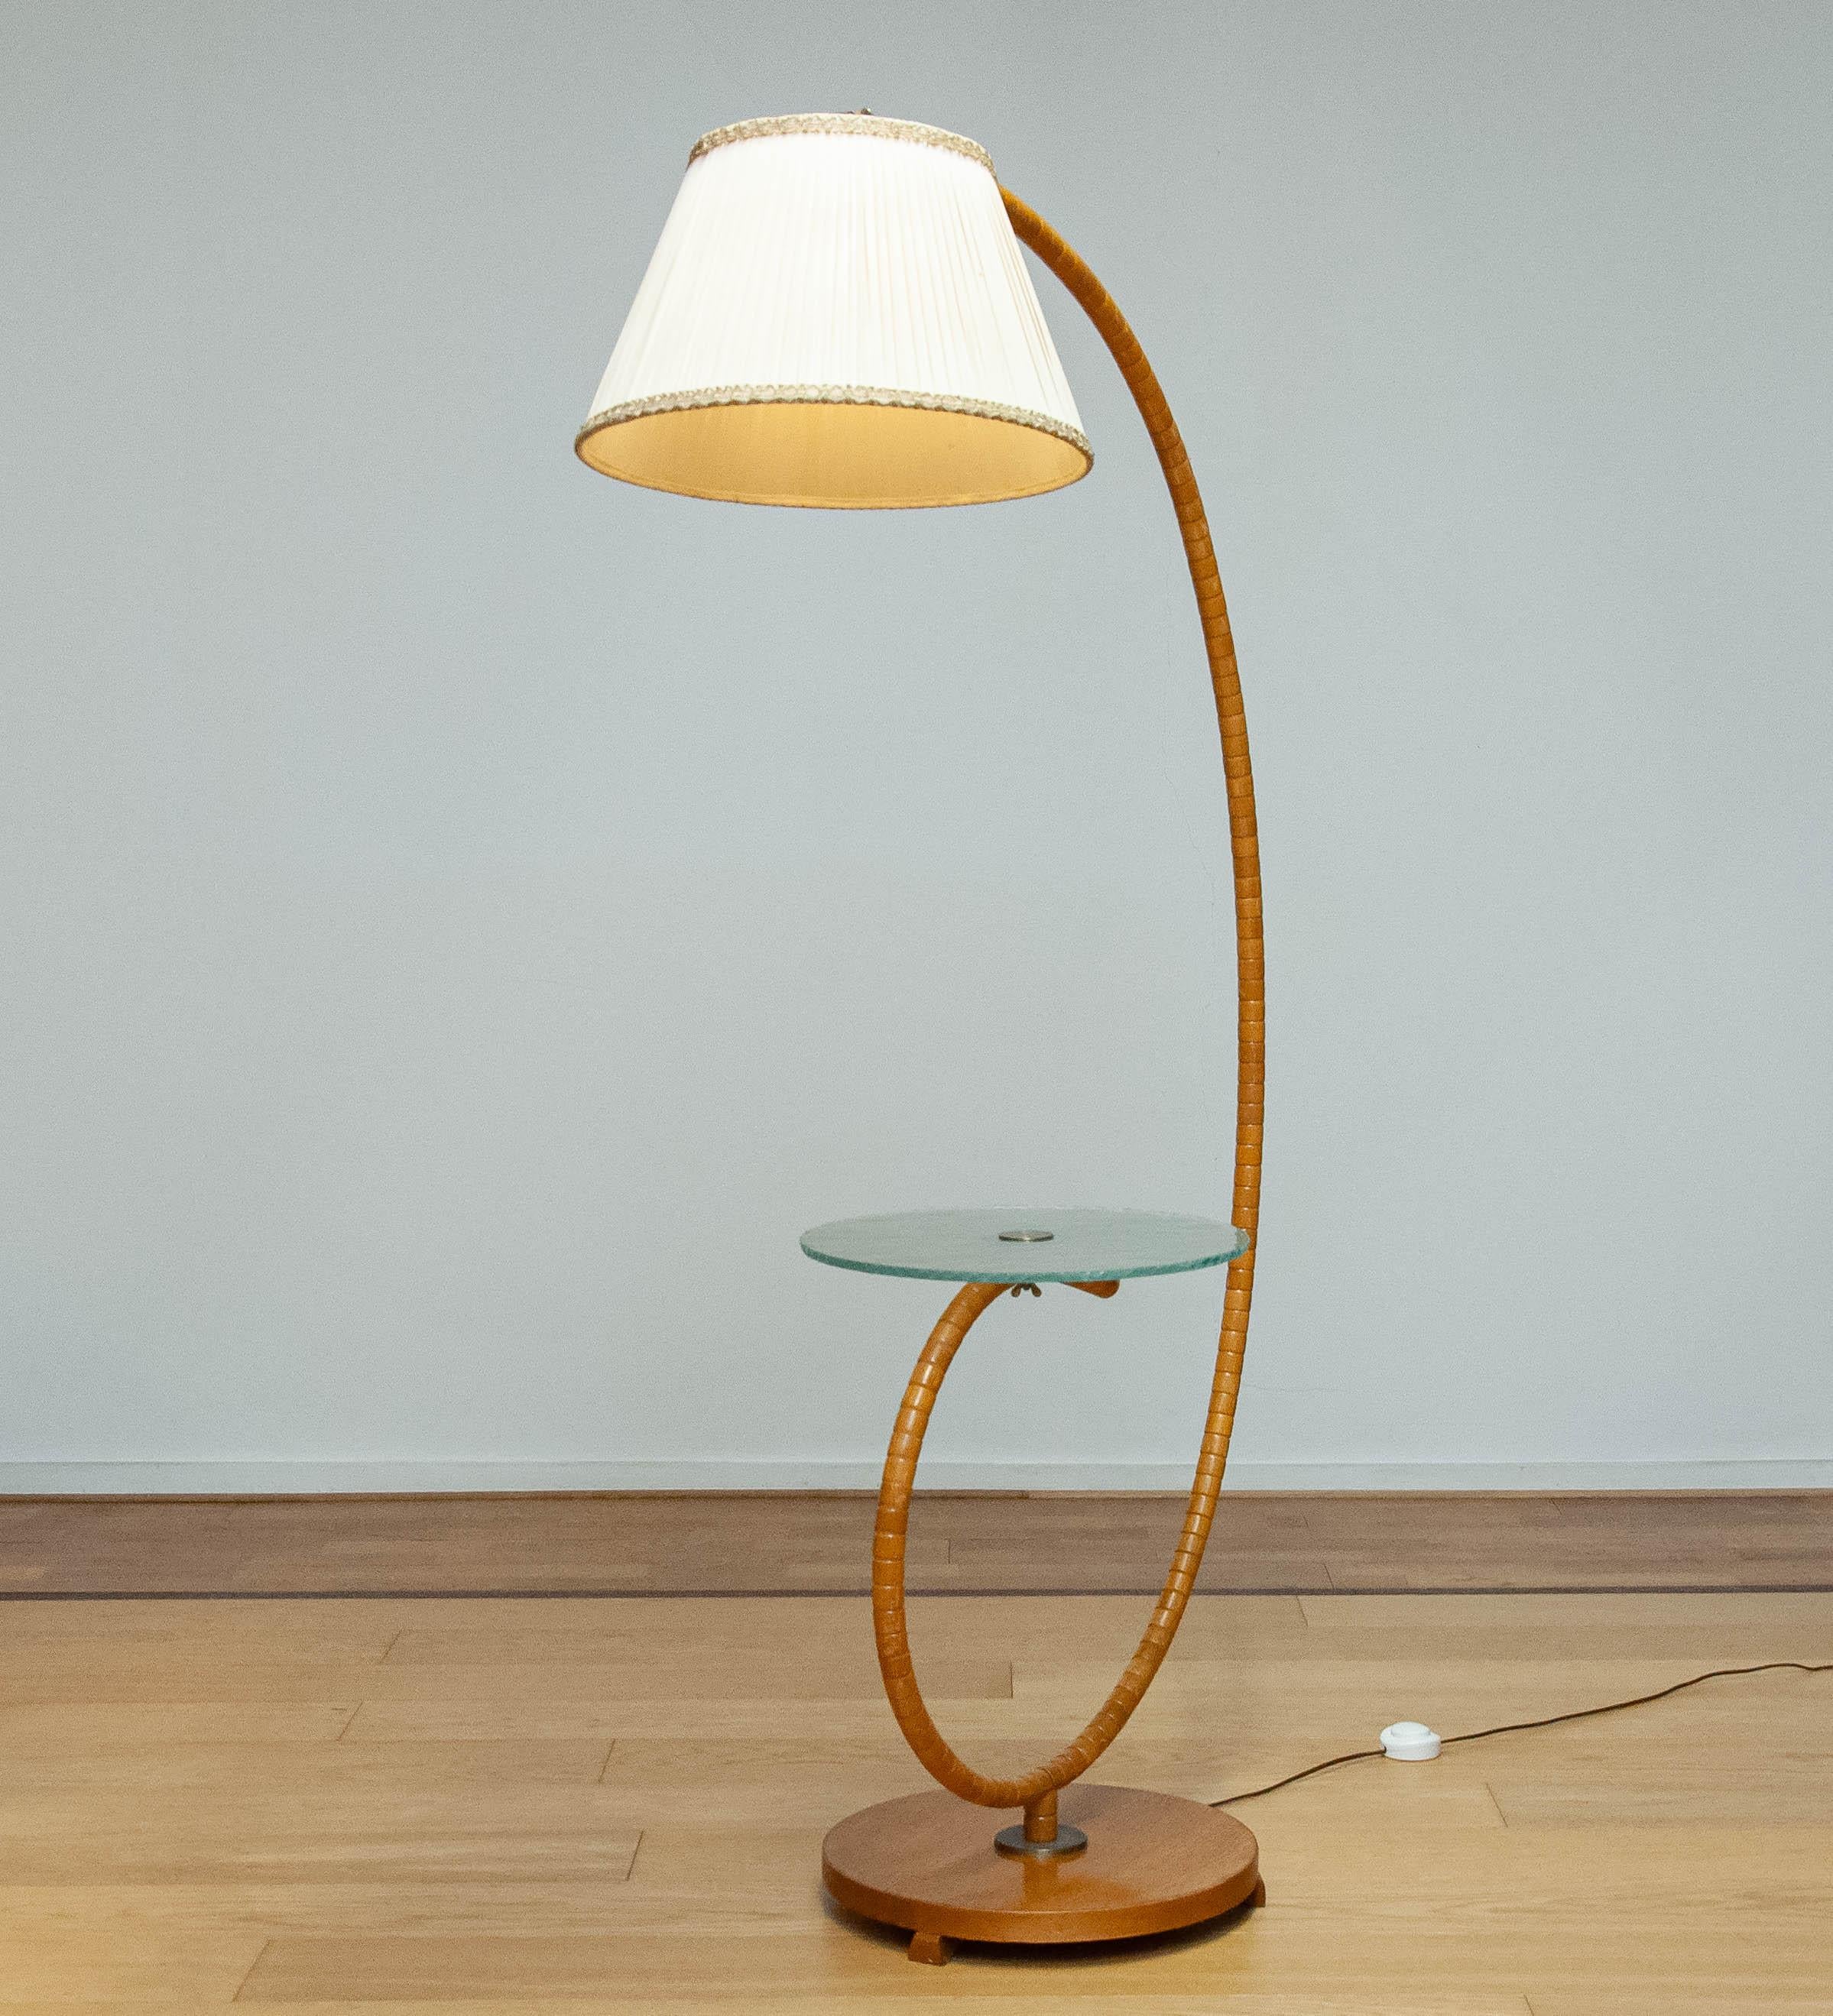 1940 Swedish Art Nouveau Floor Lamp In Elm With Art Glass Table By IWO Mariestad For Sale 2